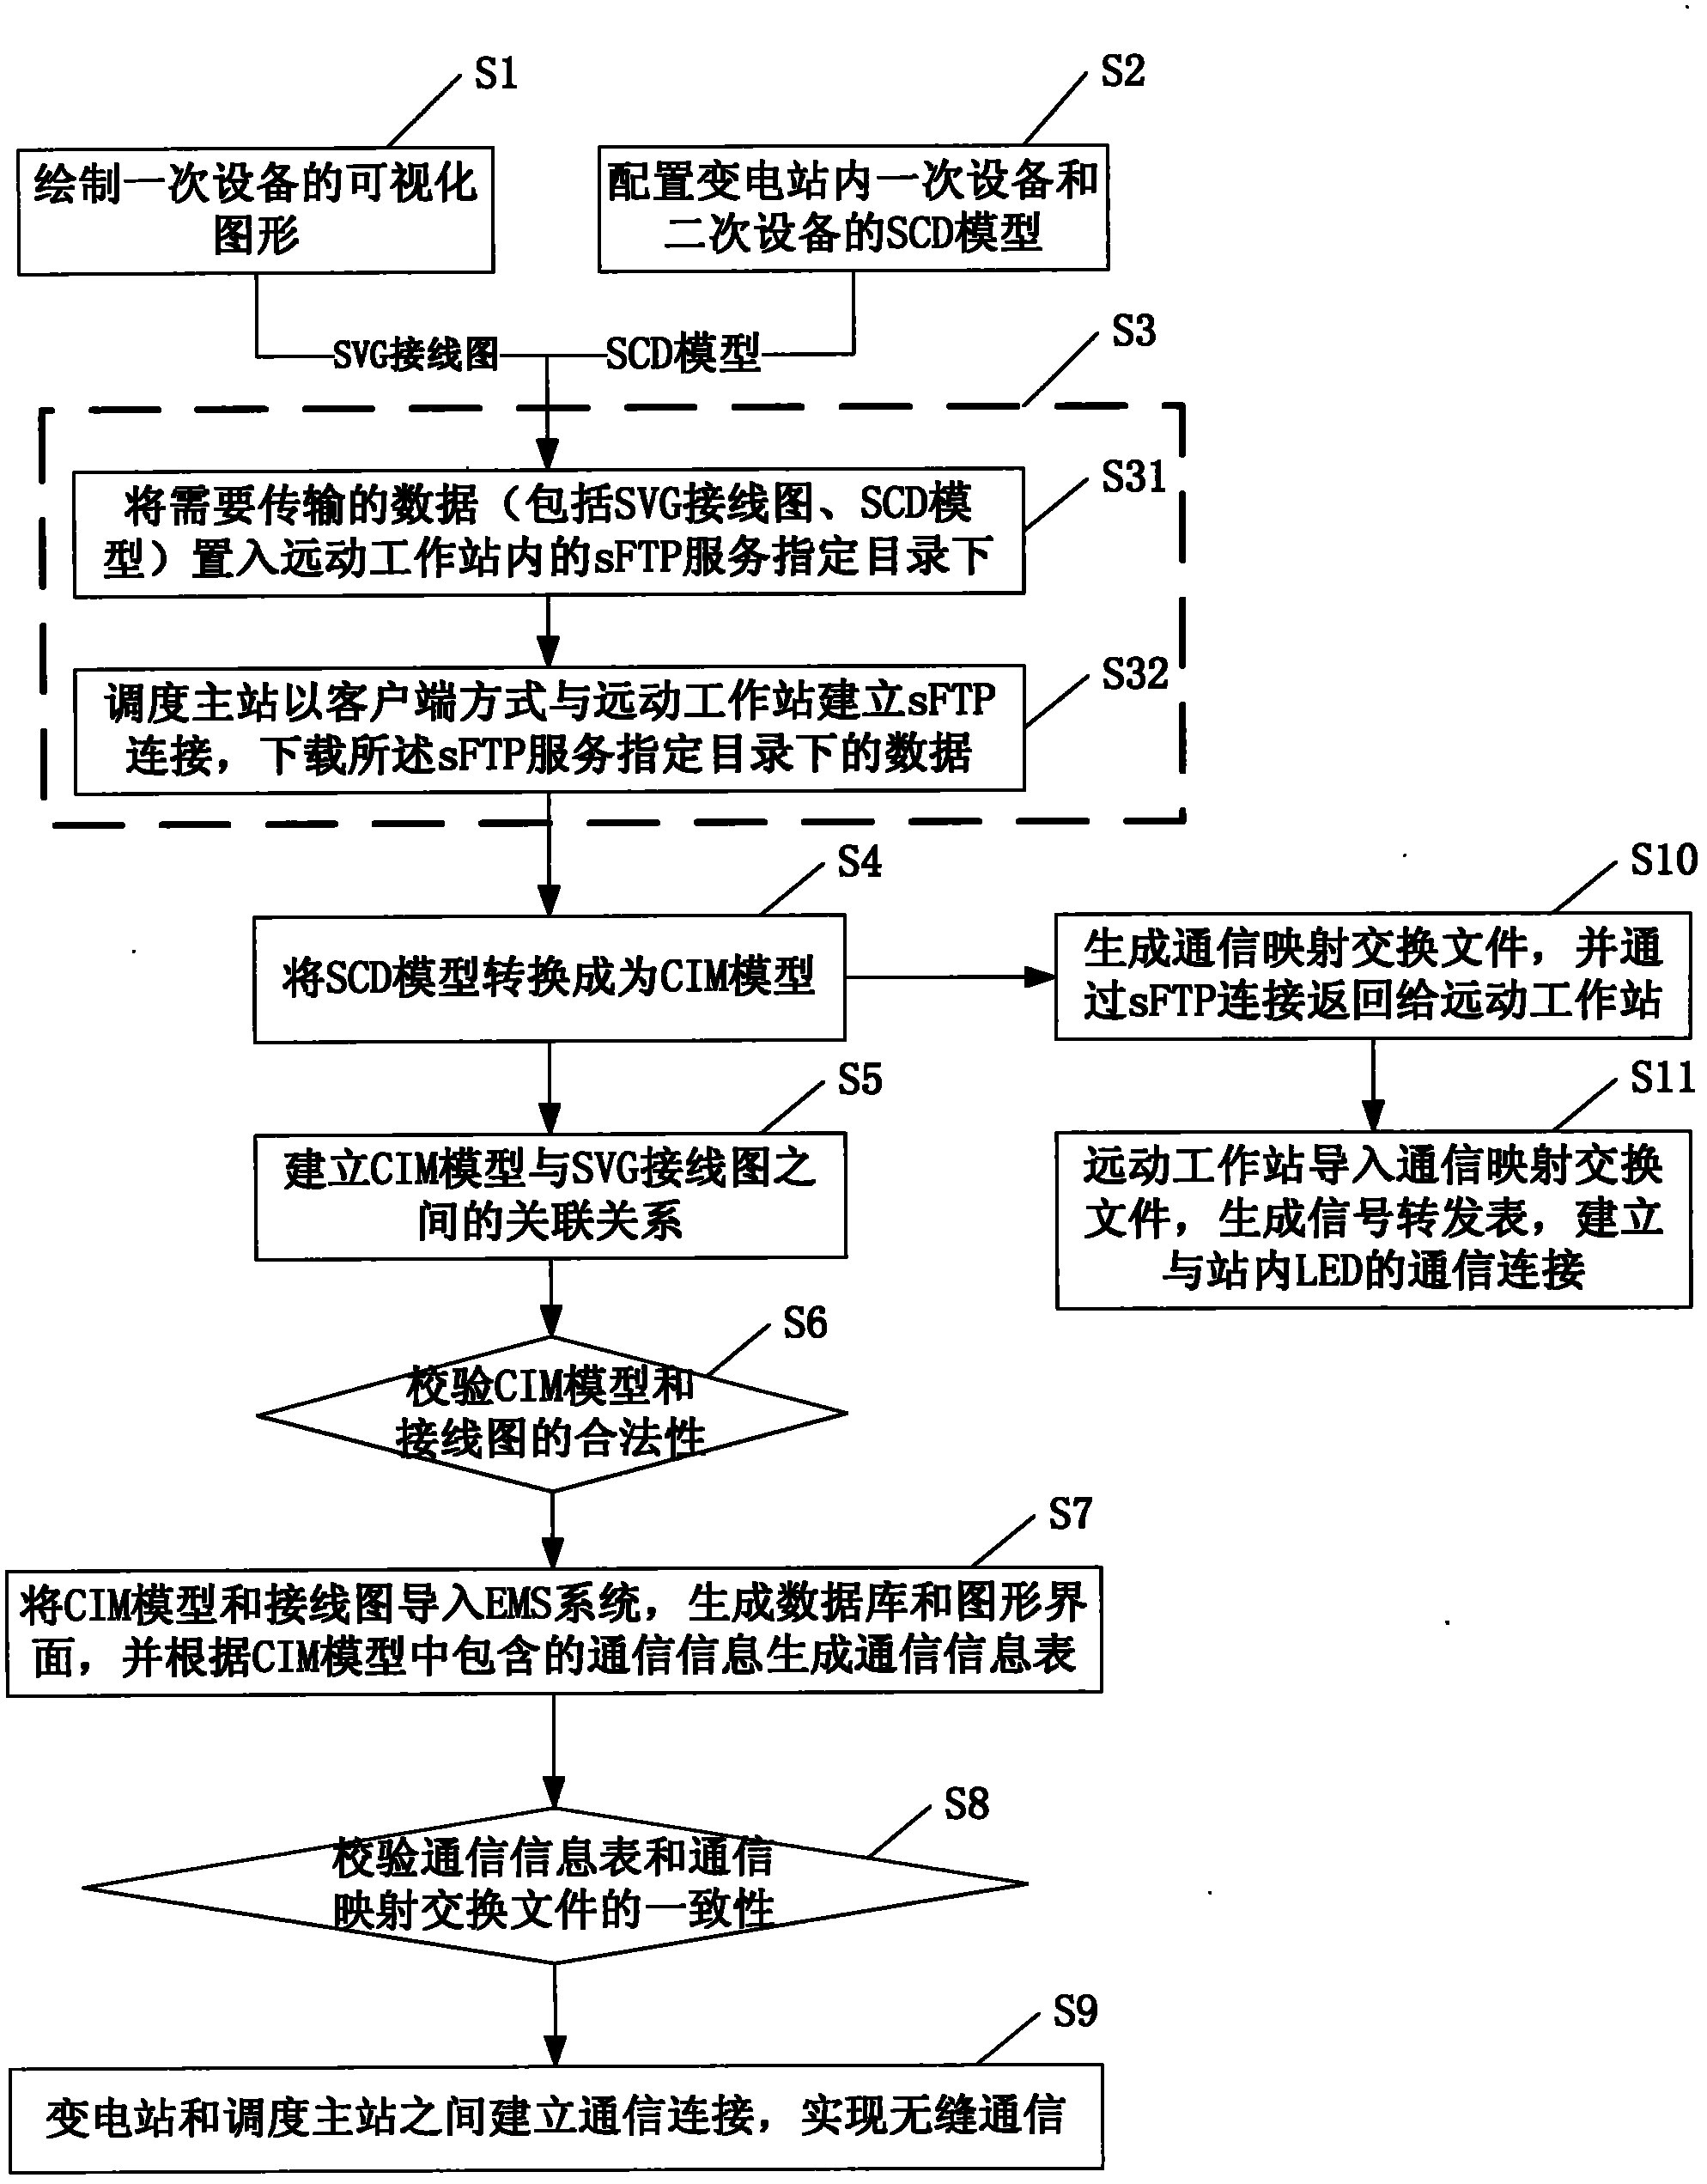 Method and system for realizing seamless communication between master scheduling station and substation of power grid